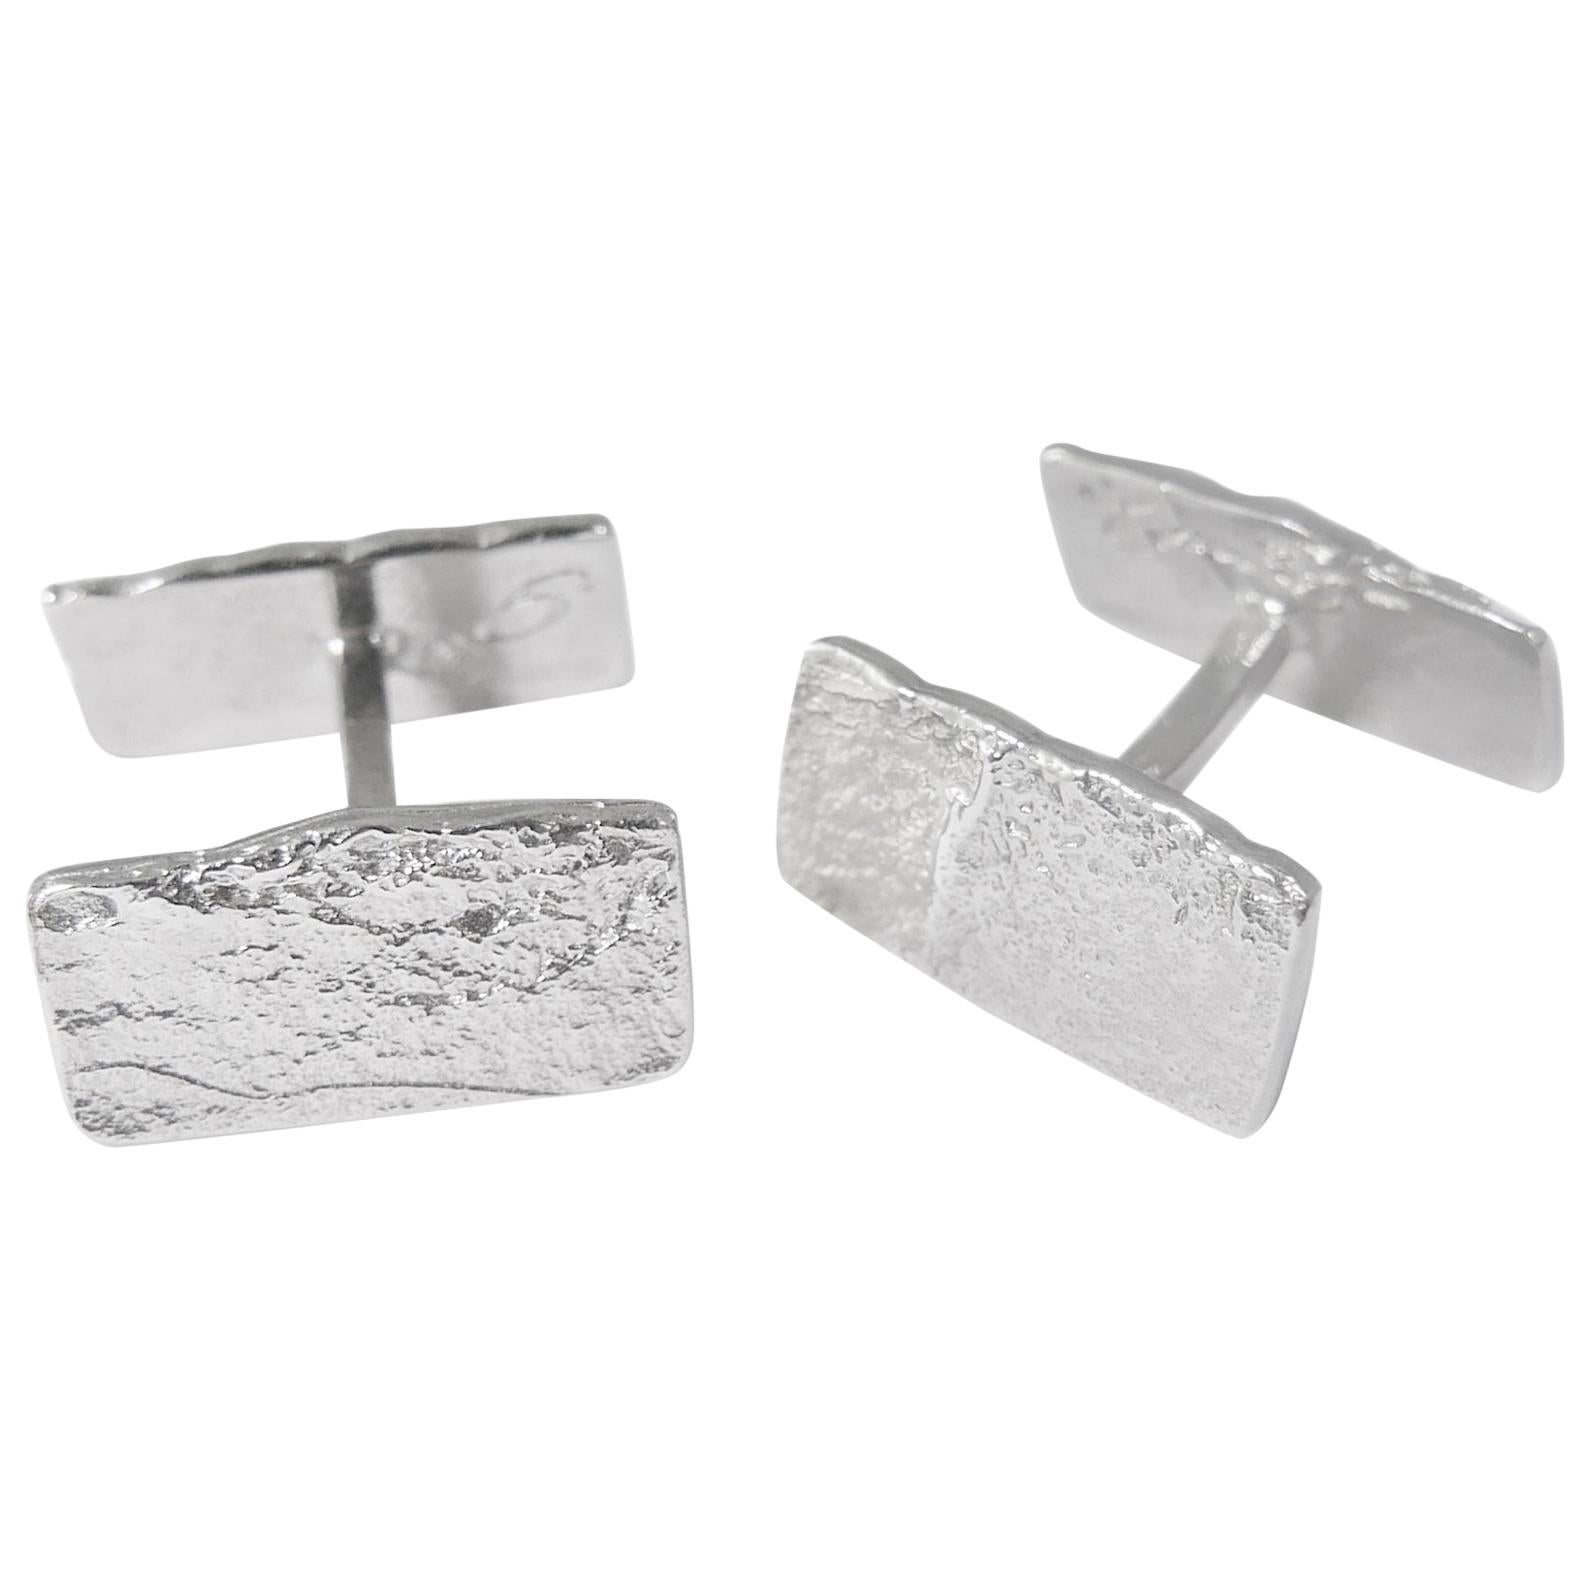 These minimalist cufflinks are crafted in solid sterling silver featuring the rustic texture of handmade paper. Designed to lie flat against the cuff for subtle impact. 

Every piece in Allison Bryan's Paper collection is individually hand-crafted